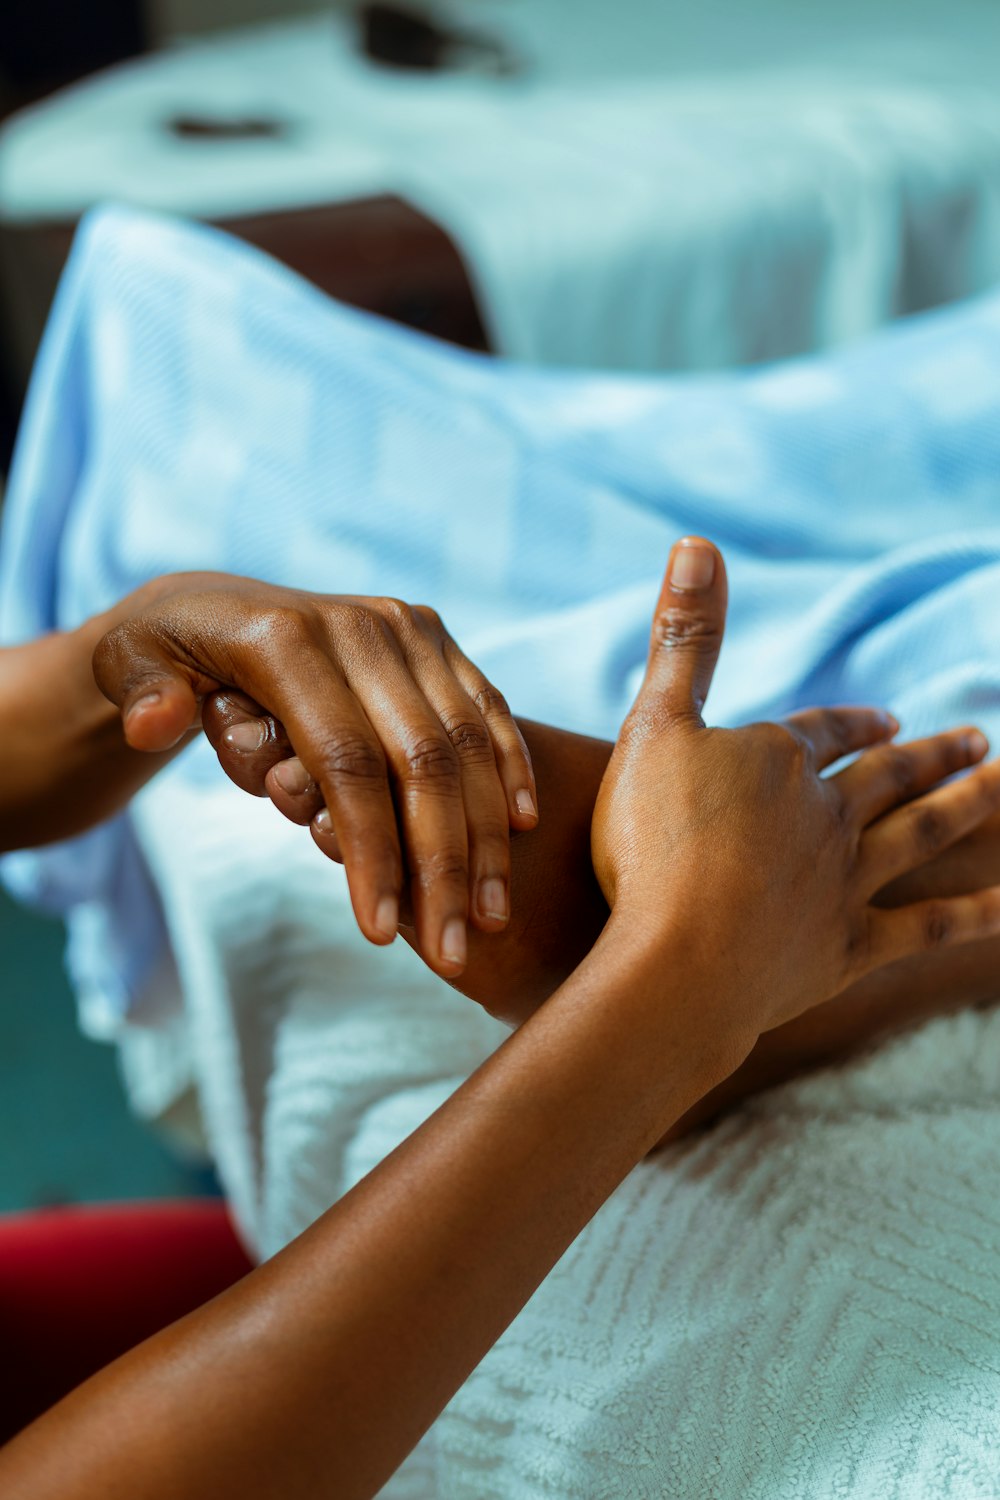 a person holding another person's hand in a hospital bed